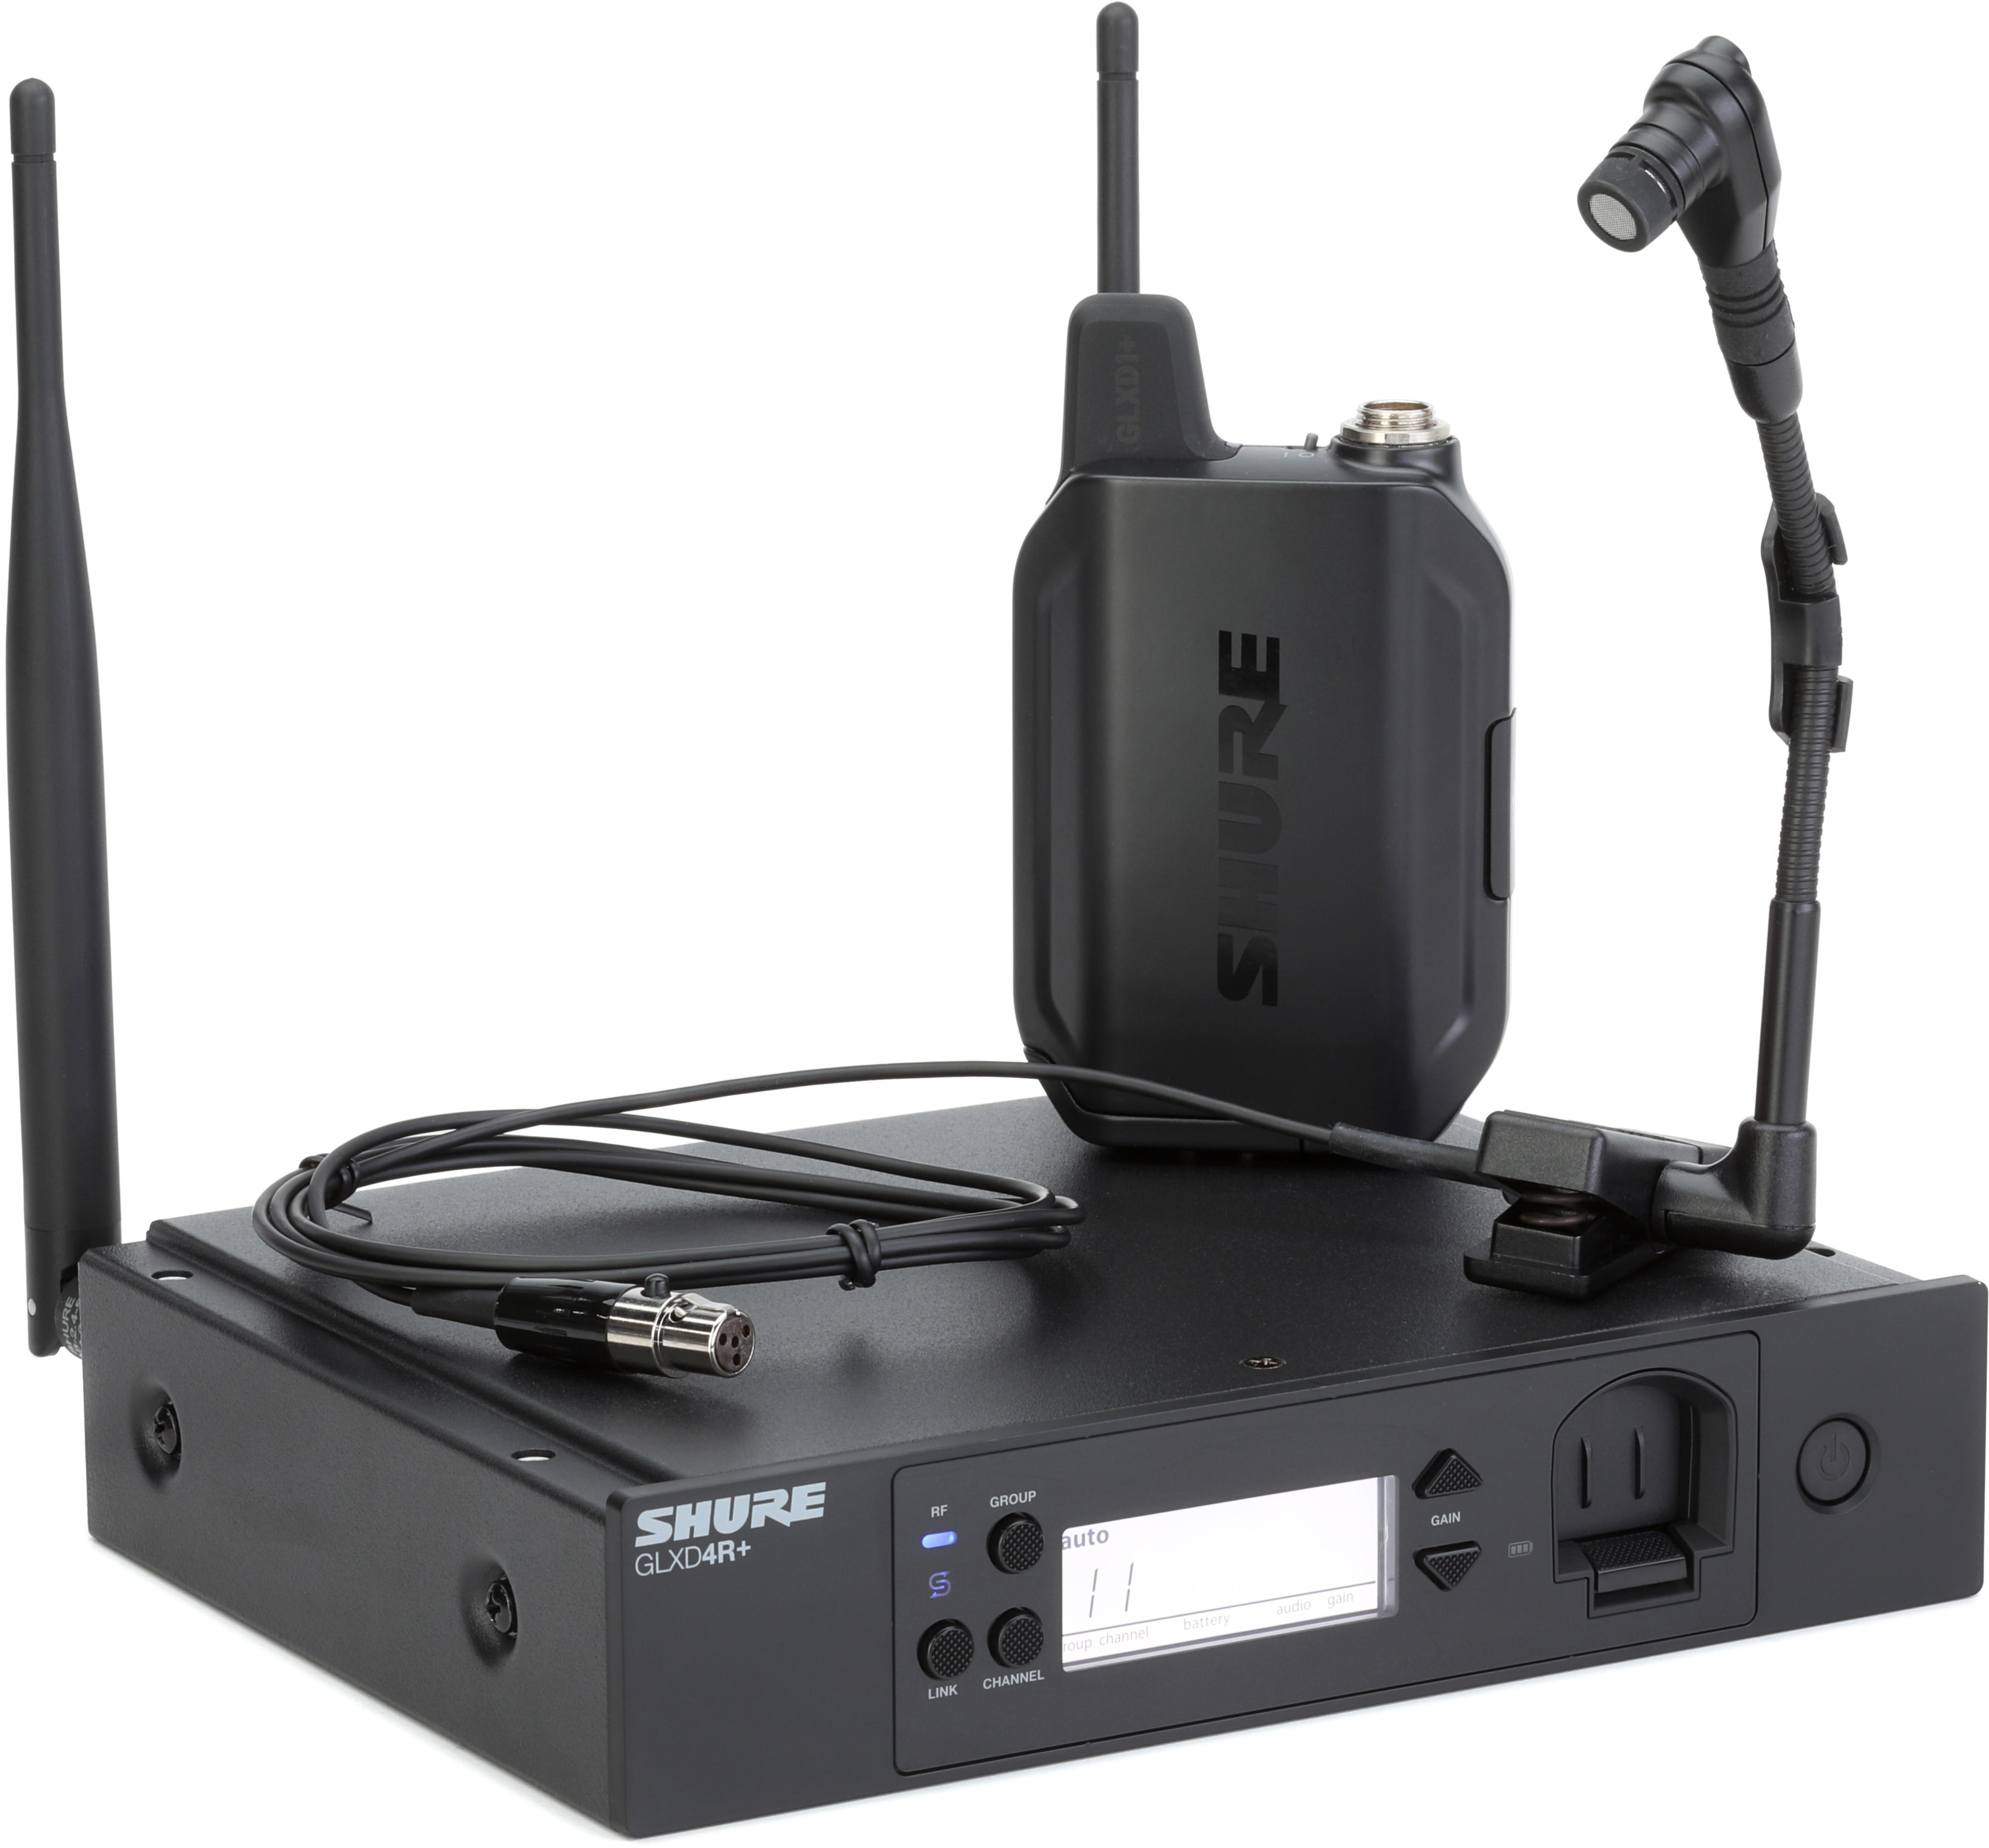 WB98H/C　Microphone　Shure　Sweetwater　Instrument　Gooseneck　Wireless　GLXD14R+/B98　Digital　with　Rackmount　System